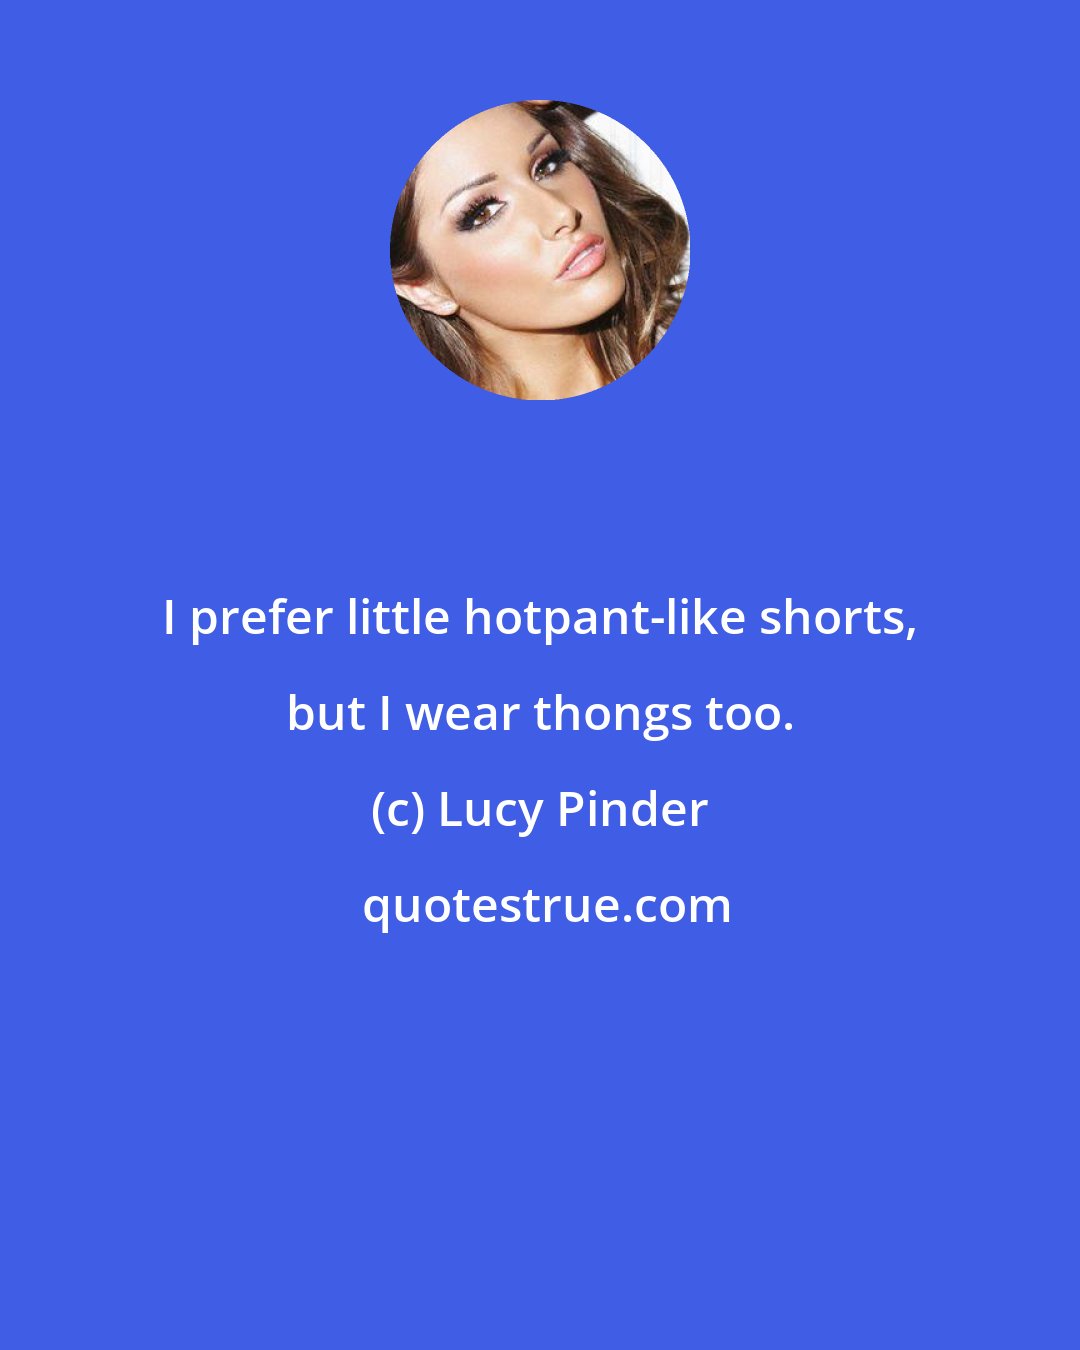 Lucy Pinder: I prefer little hotpant-like shorts, but I wear thongs too.